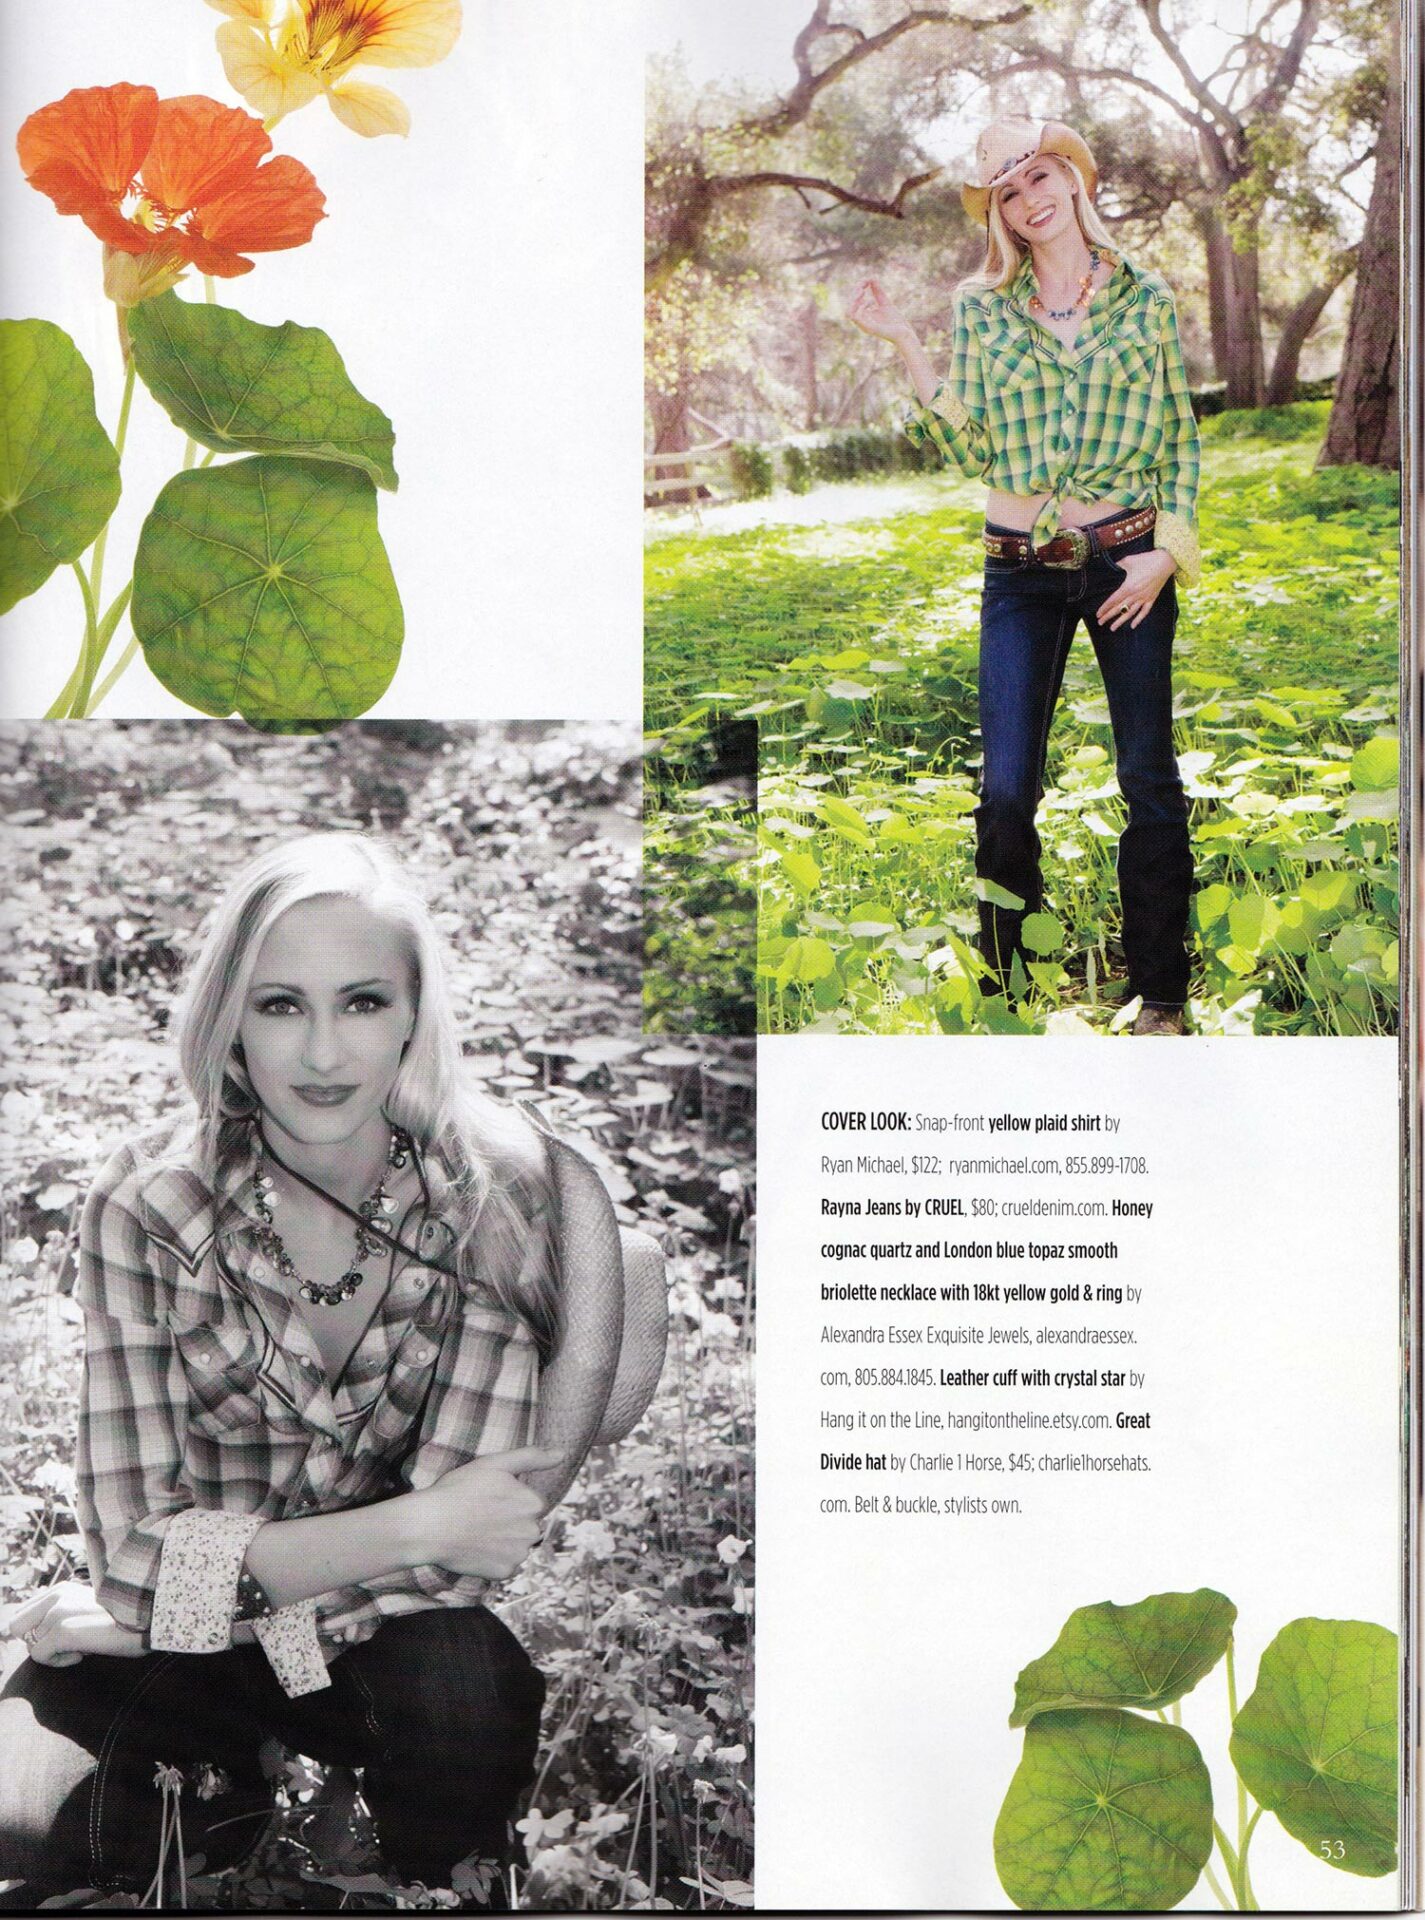 A woman in a plaid shirt is posing in front of a flower.